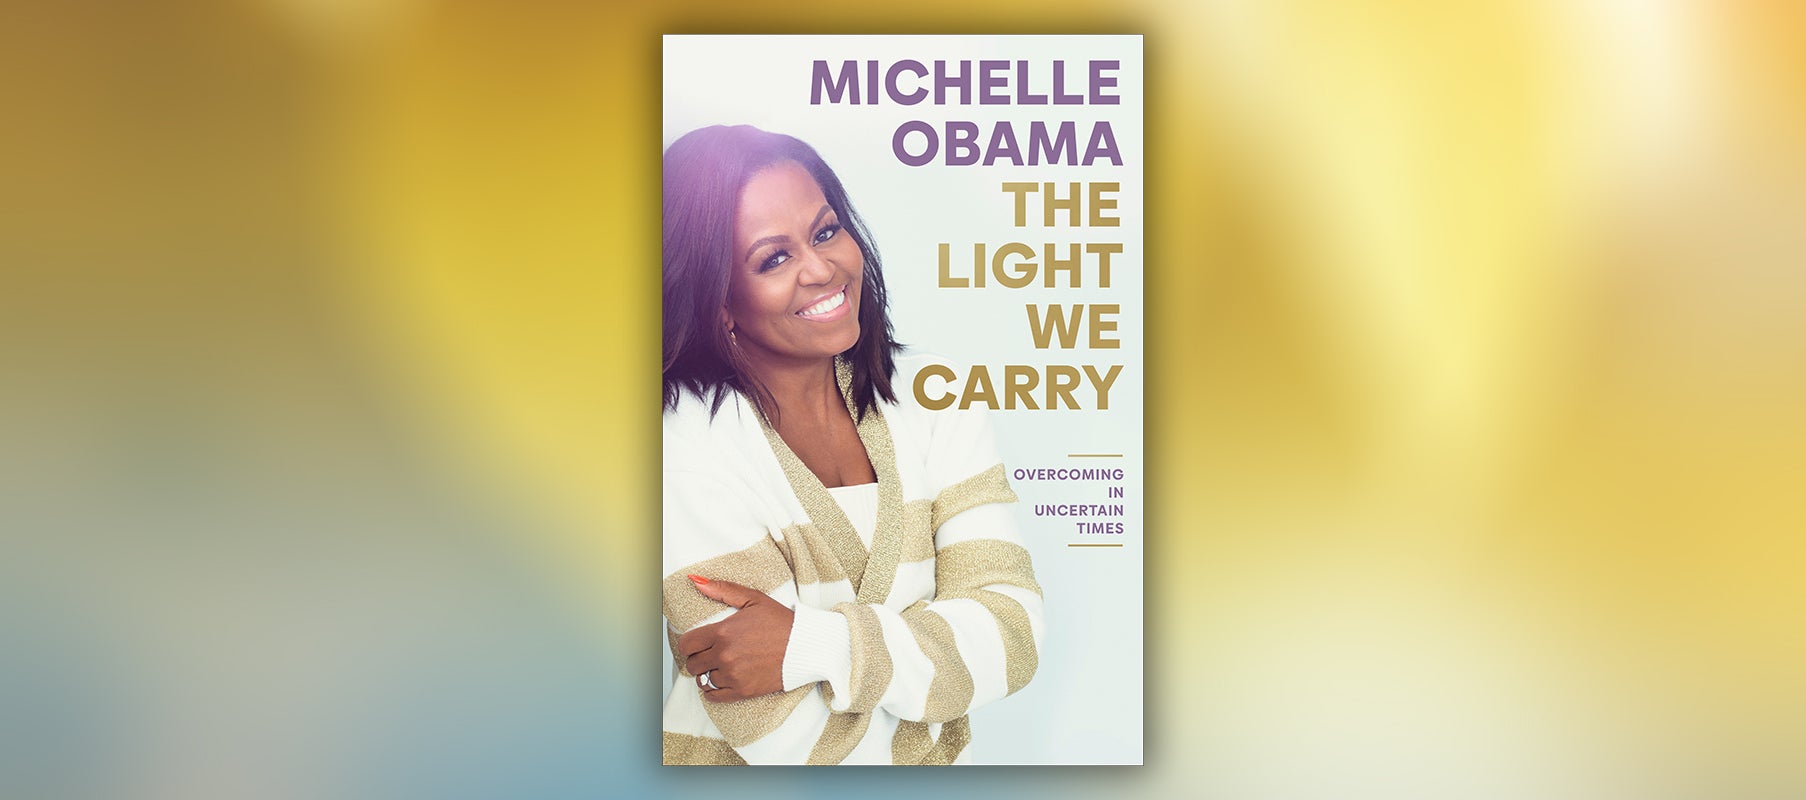 FROM THE PAGE: An Excerpt from Michelle Obama’s <I>The Light We Carry</I>